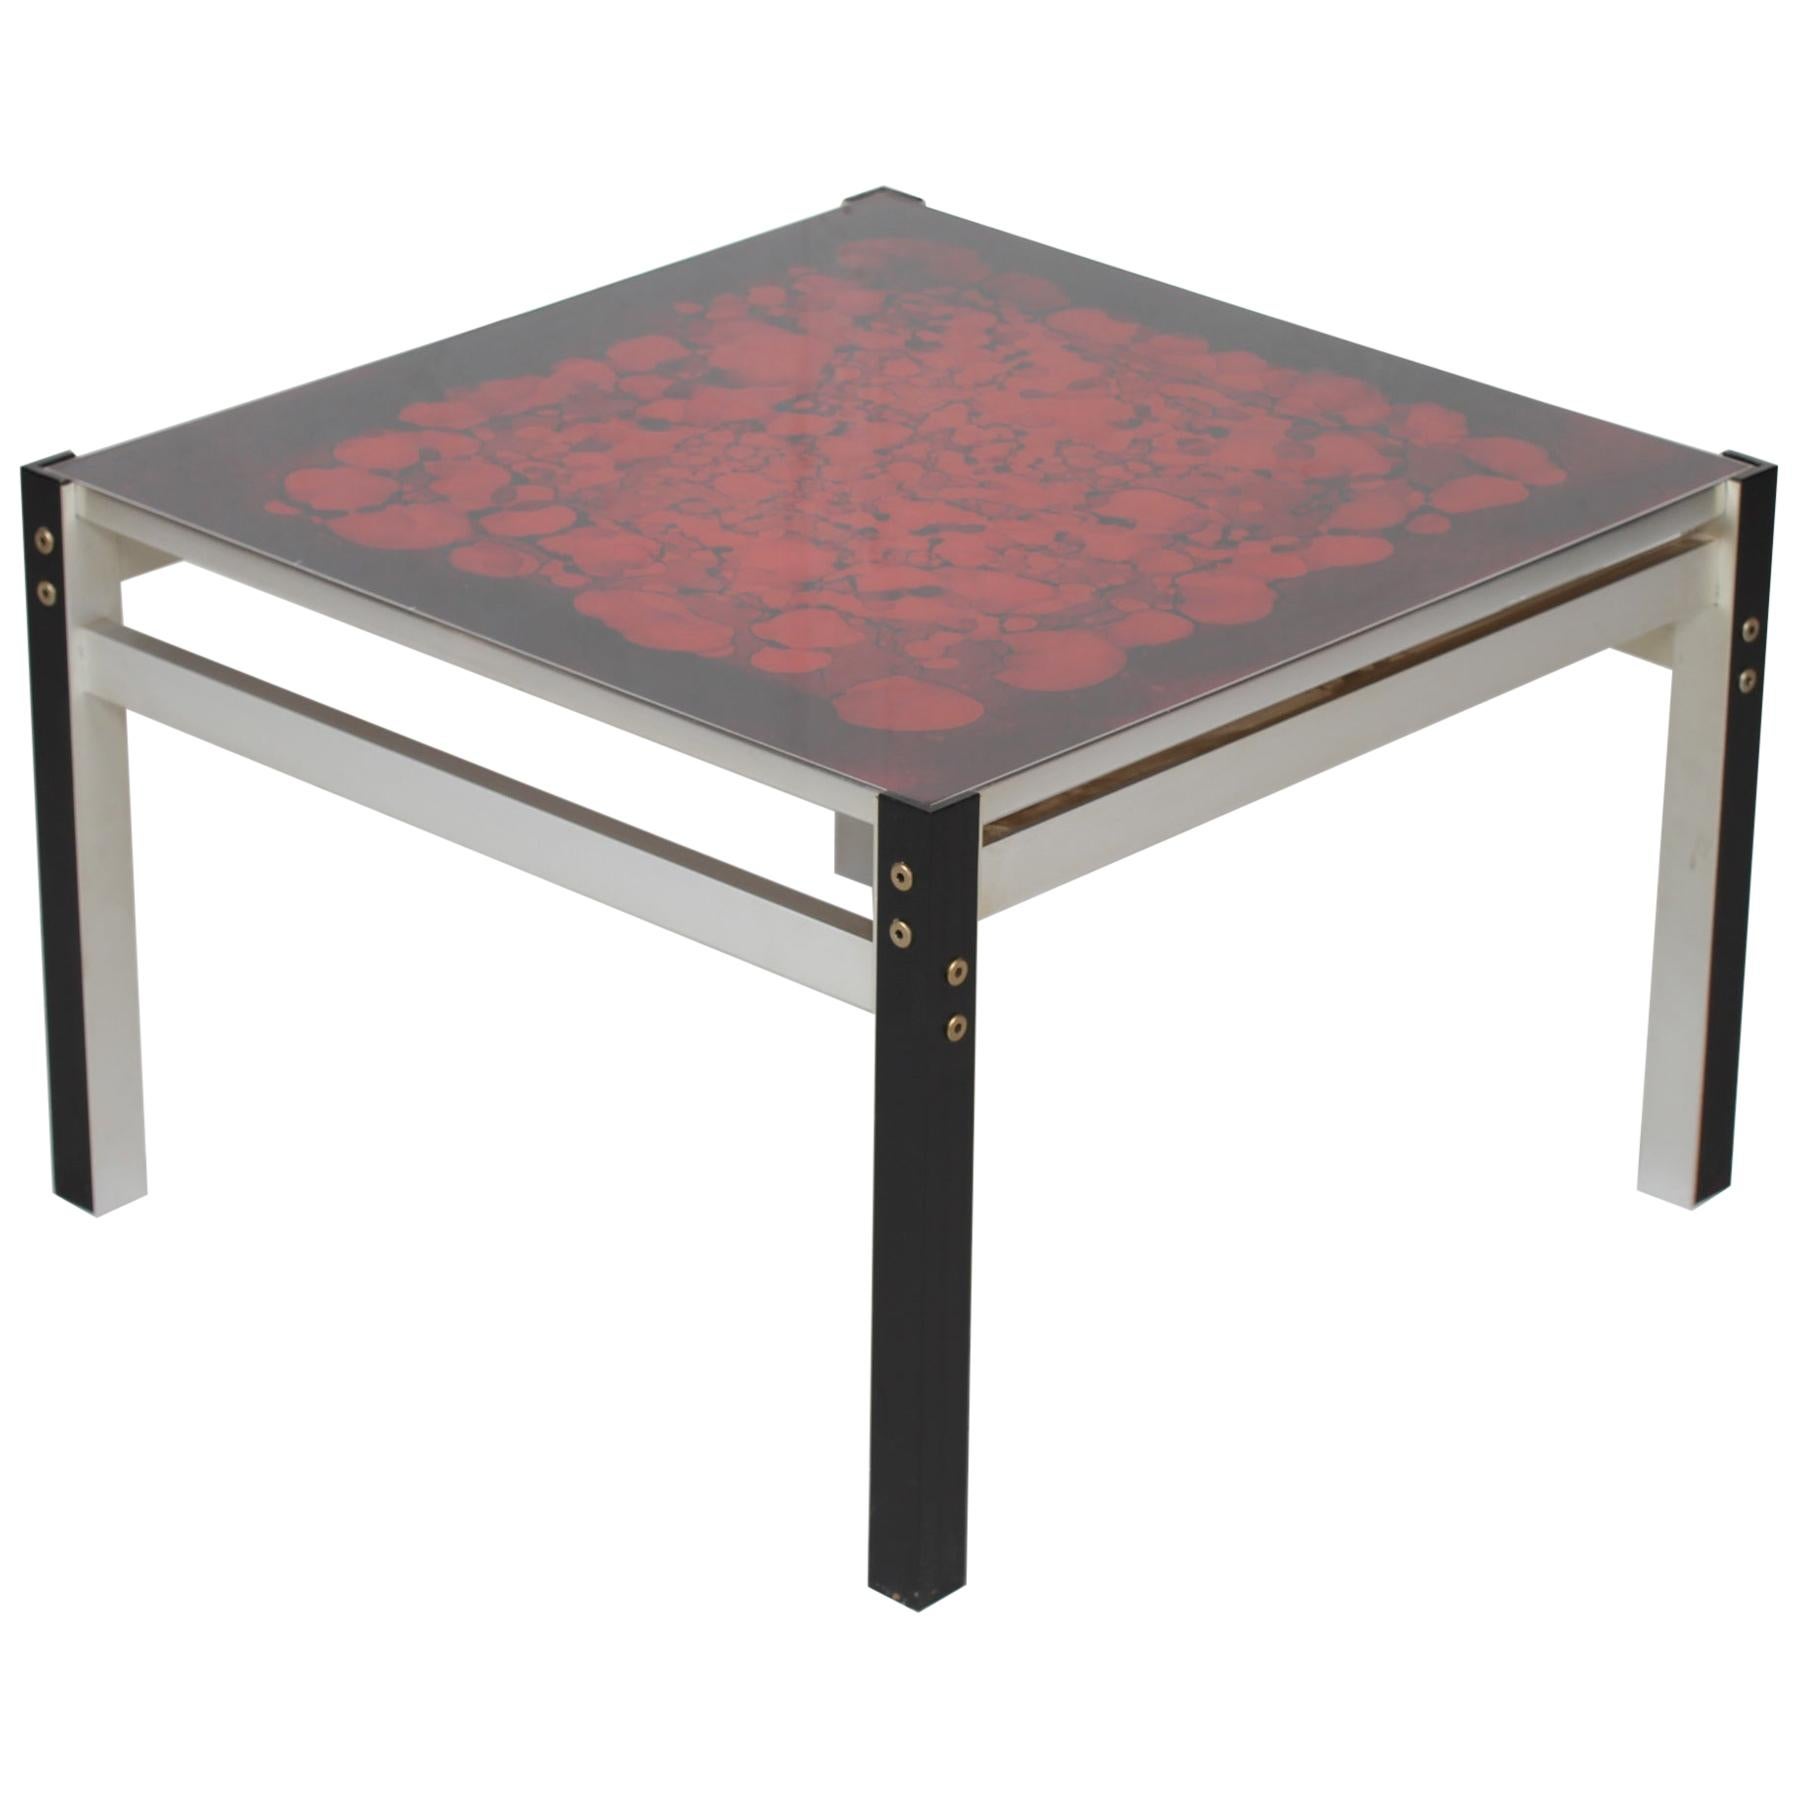 Danish Modern Square Glass Table with Red Decoration and Aluminium Frame, 1970s